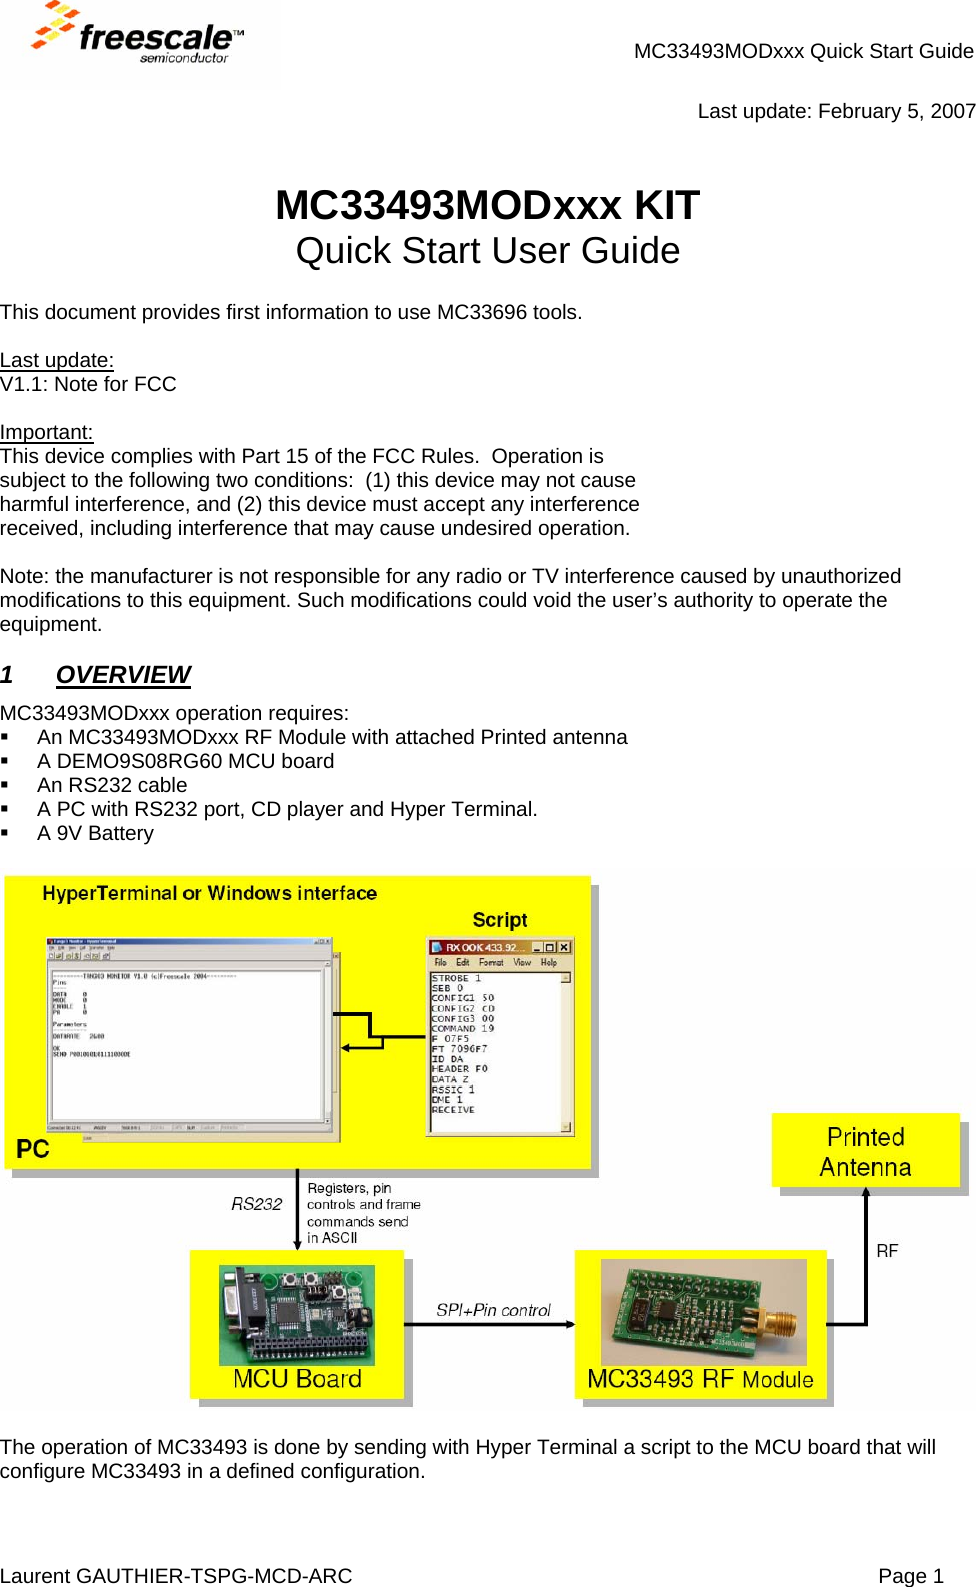 MC33493MODxxx Quick Start Guide Laurent GAUTHIER-TSPG-MCD-ARC  Page 1  Last update: February 5, 2007   MC33493MODxxx KIT Quick Start User Guide  This document provides first information to use MC33696 tools.  Last update: V1.1: Note for FCC  Important: This device complies with Part 15 of the FCC Rules.  Operation is subject to the following two conditions:  (1) this device may not cause harmful interference, and (2) this device must accept any interference received, including interference that may cause undesired operation.  Note: the manufacturer is not responsible for any radio or TV interference caused by unauthorized modifications to this equipment. Such modifications could void the user’s authority to operate the equipment.  1 OVERVIEW  MC33493MODxxx operation requires:   An MC33493MODxxx RF Module with attached Printed antenna   A DEMO9S08RG60 MCU board  An RS232 cable   A PC with RS232 port, CD player and Hyper Terminal.   A 9V Battery    The operation of MC33493 is done by sending with Hyper Terminal a script to the MCU board that will configure MC33493 in a defined configuration. 